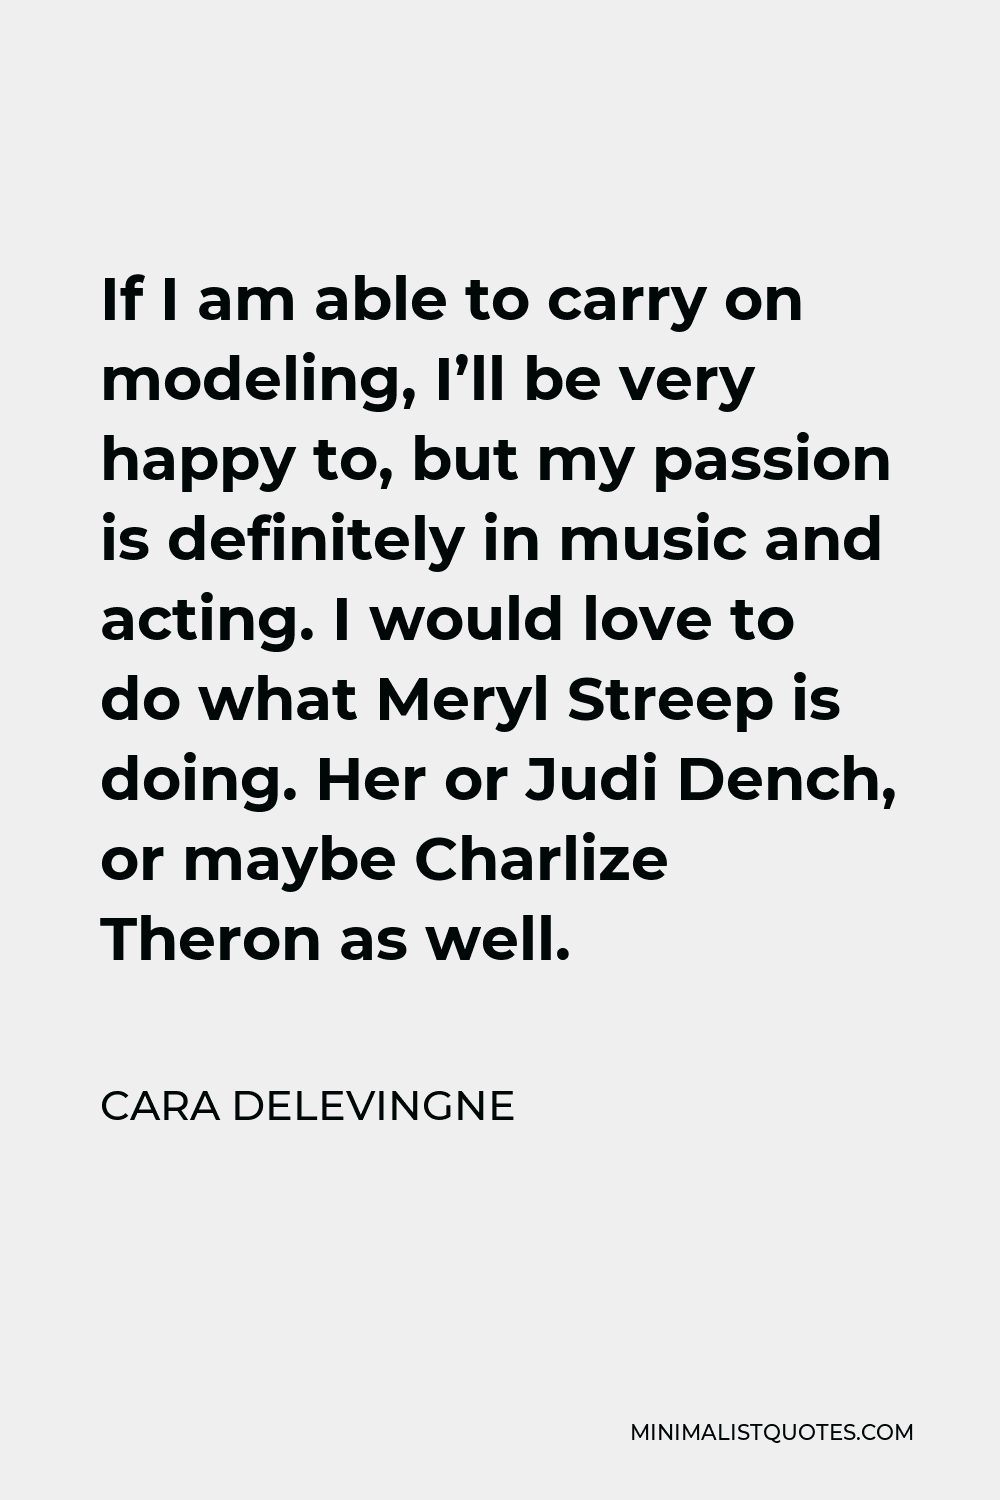 Cara Delevingne Quote - If I am able to carry on modeling, I’ll be very happy to, but my passion is definitely in music and acting. I would love to do what Meryl Streep is doing. Her or Judi Dench, or maybe Charlize Theron as well.